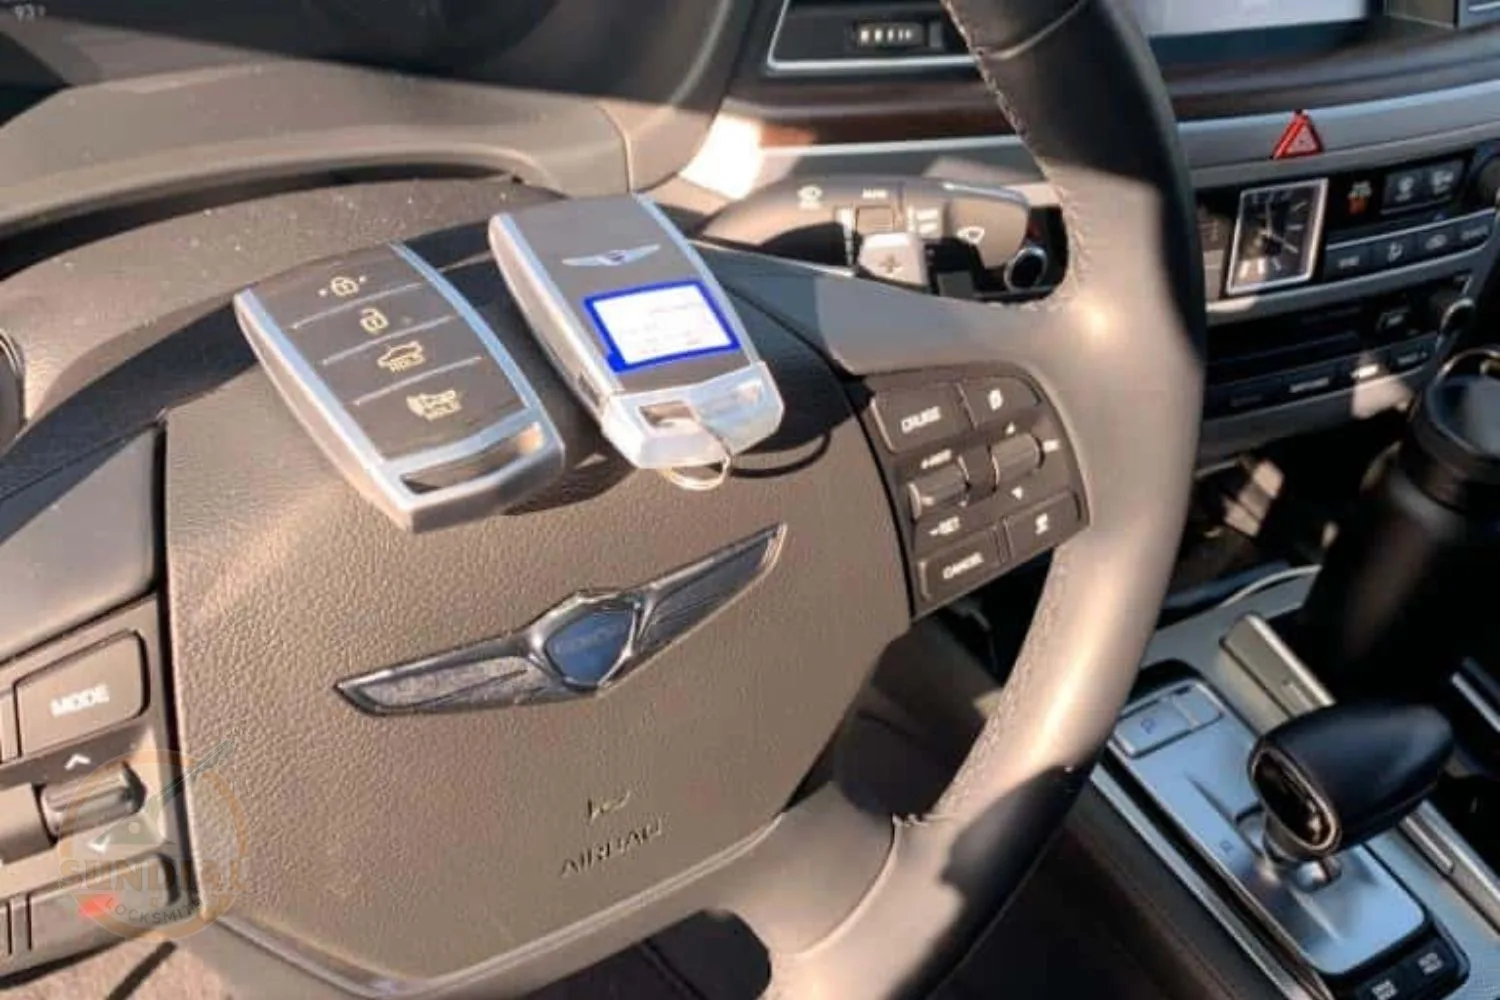 Two modern key fobs placed on top of a car's steering wheel with the car's interior controls in the background.